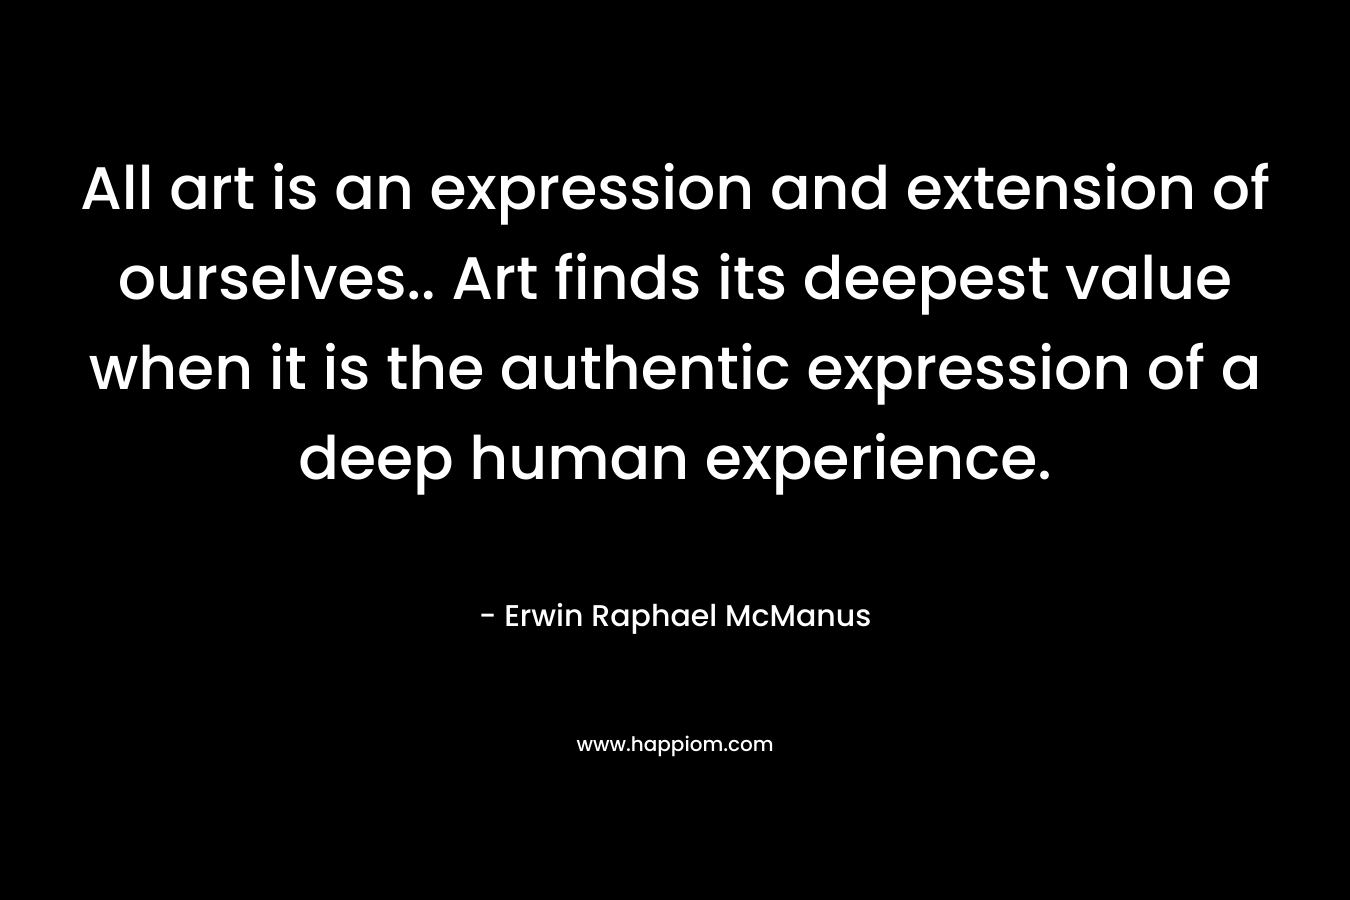 All art is an expression and extension of ourselves.. Art finds its deepest value when it is the authentic expression of a deep human experience.